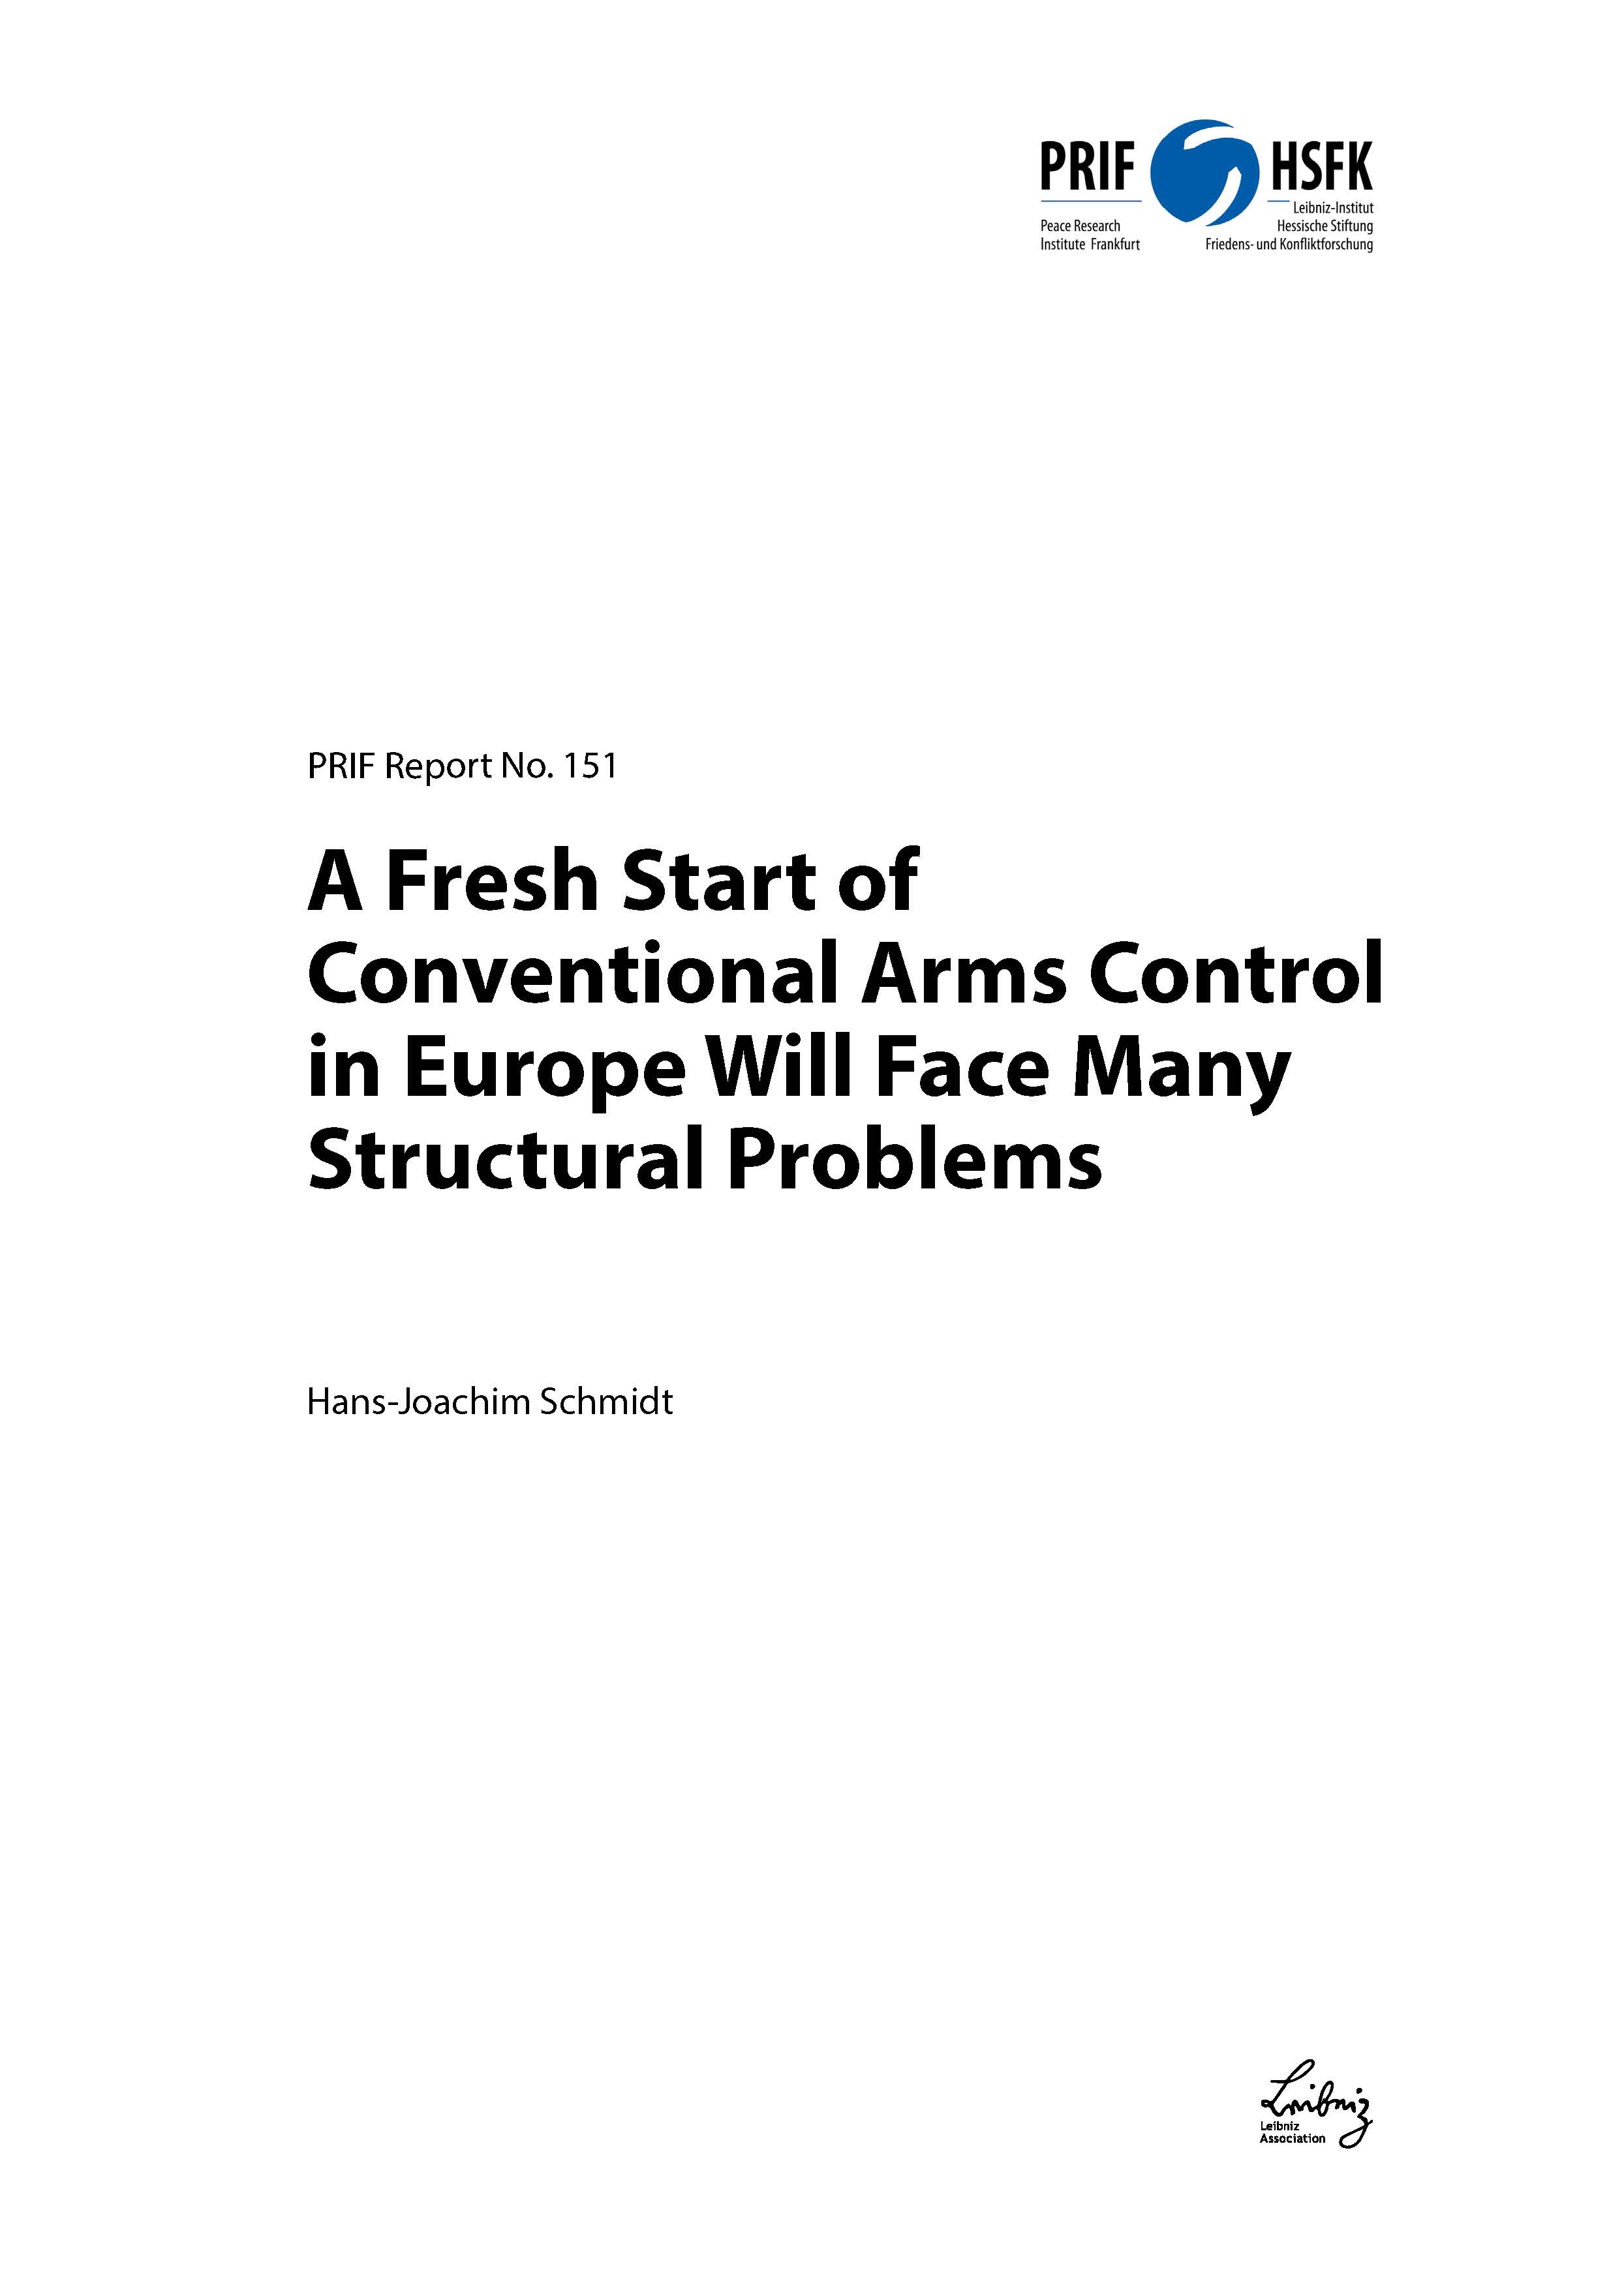 Download: A Fresh Start of Conventional Arms Control in Europe Will Face Many Structural Problems